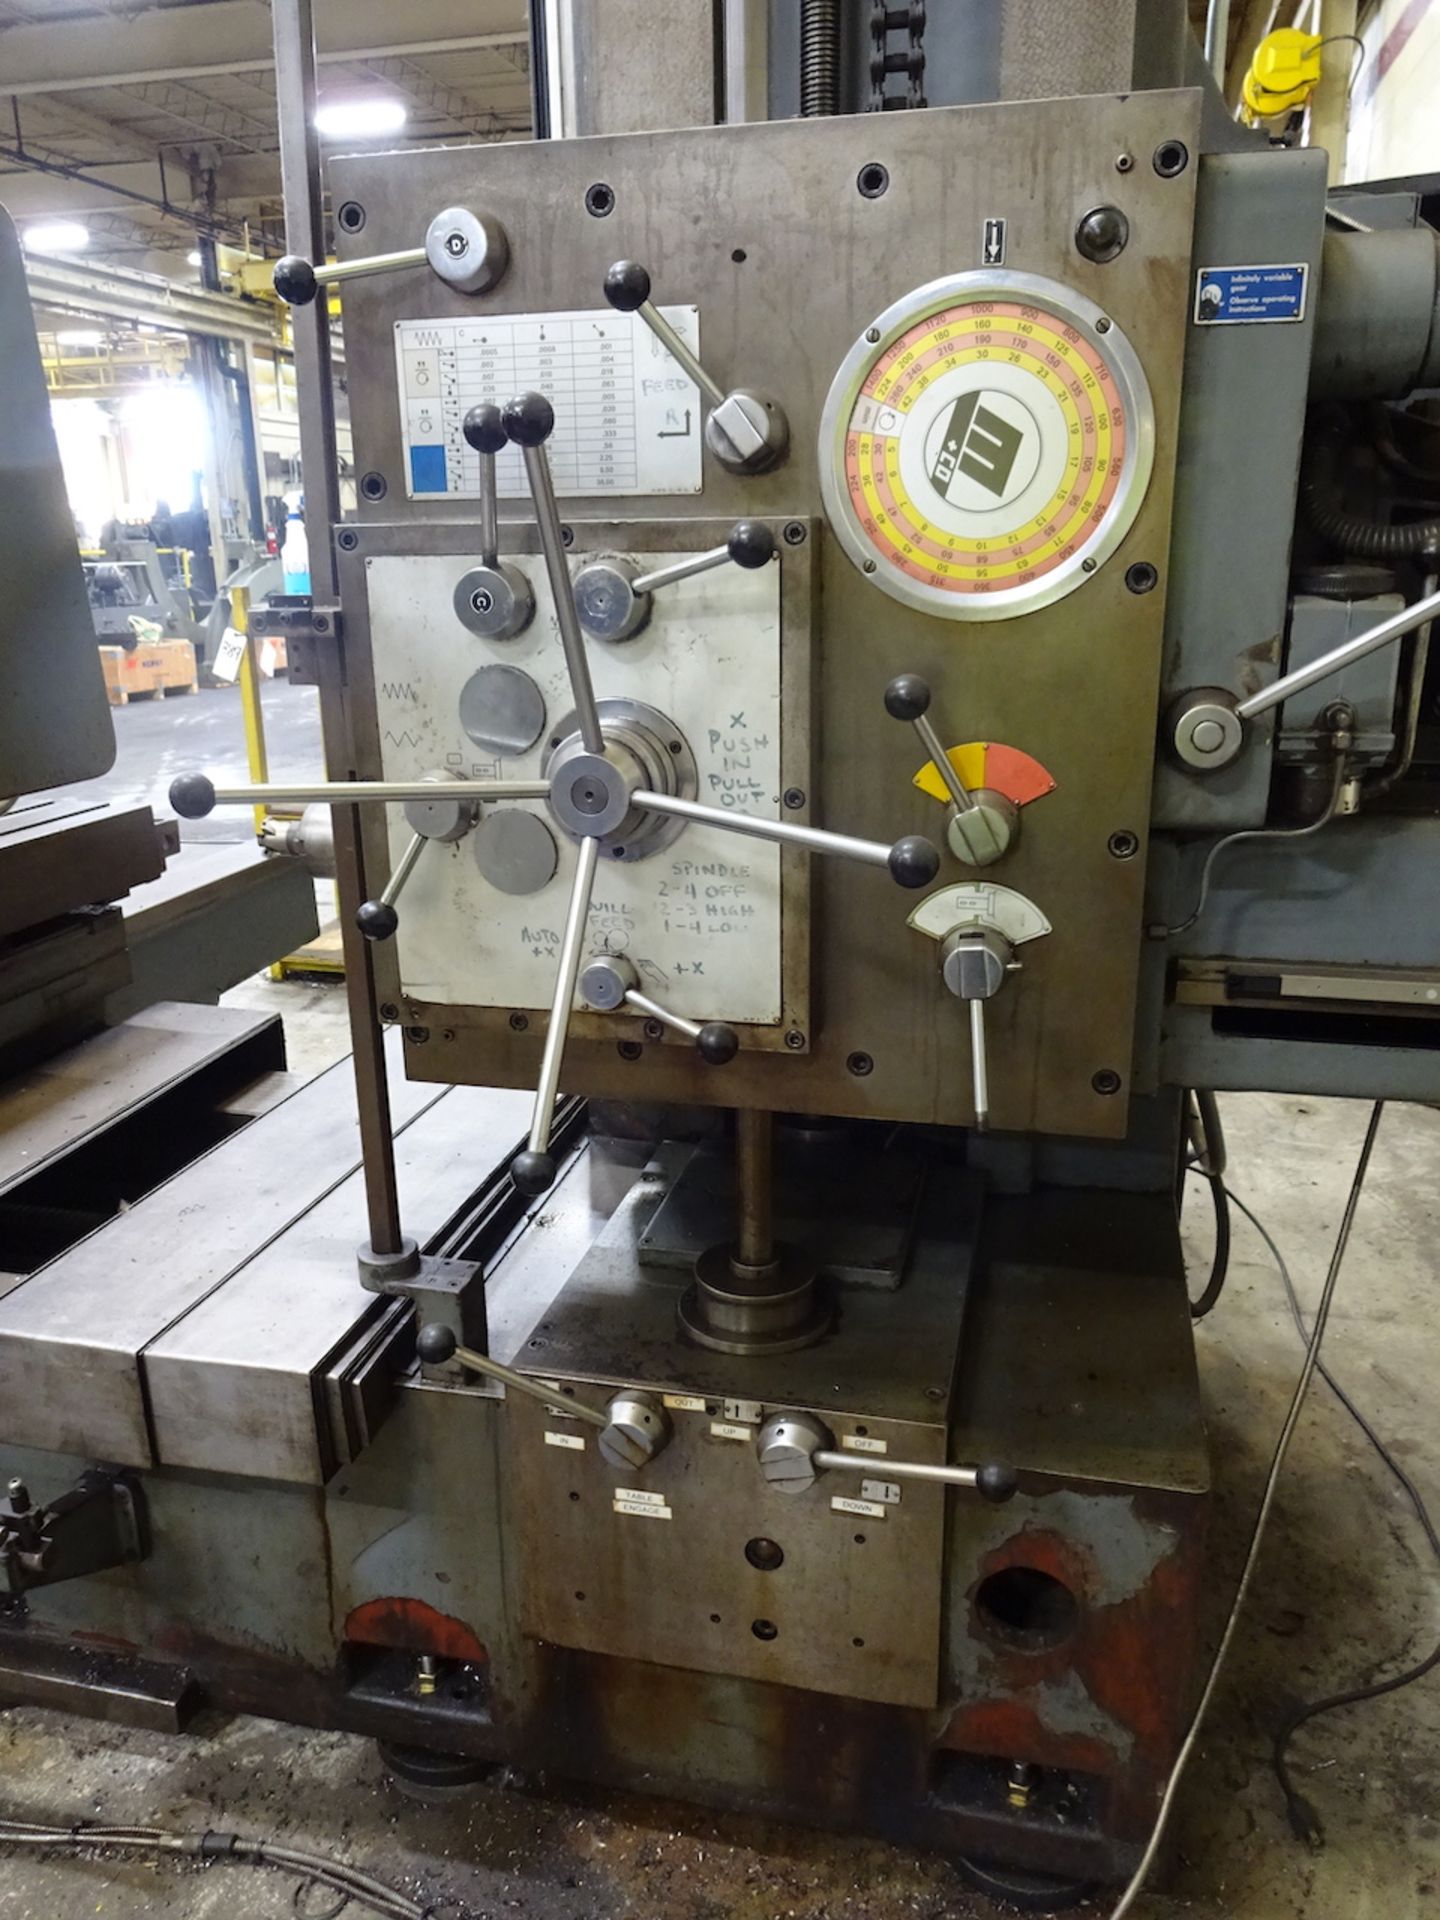 MEUSER MODEL M76BFS HORIZONTAL BORING MILL, S/N M76BFS-45286, 39 X 39 BUILT-IN ROTARY TABLE, 7. - Image 17 of 20